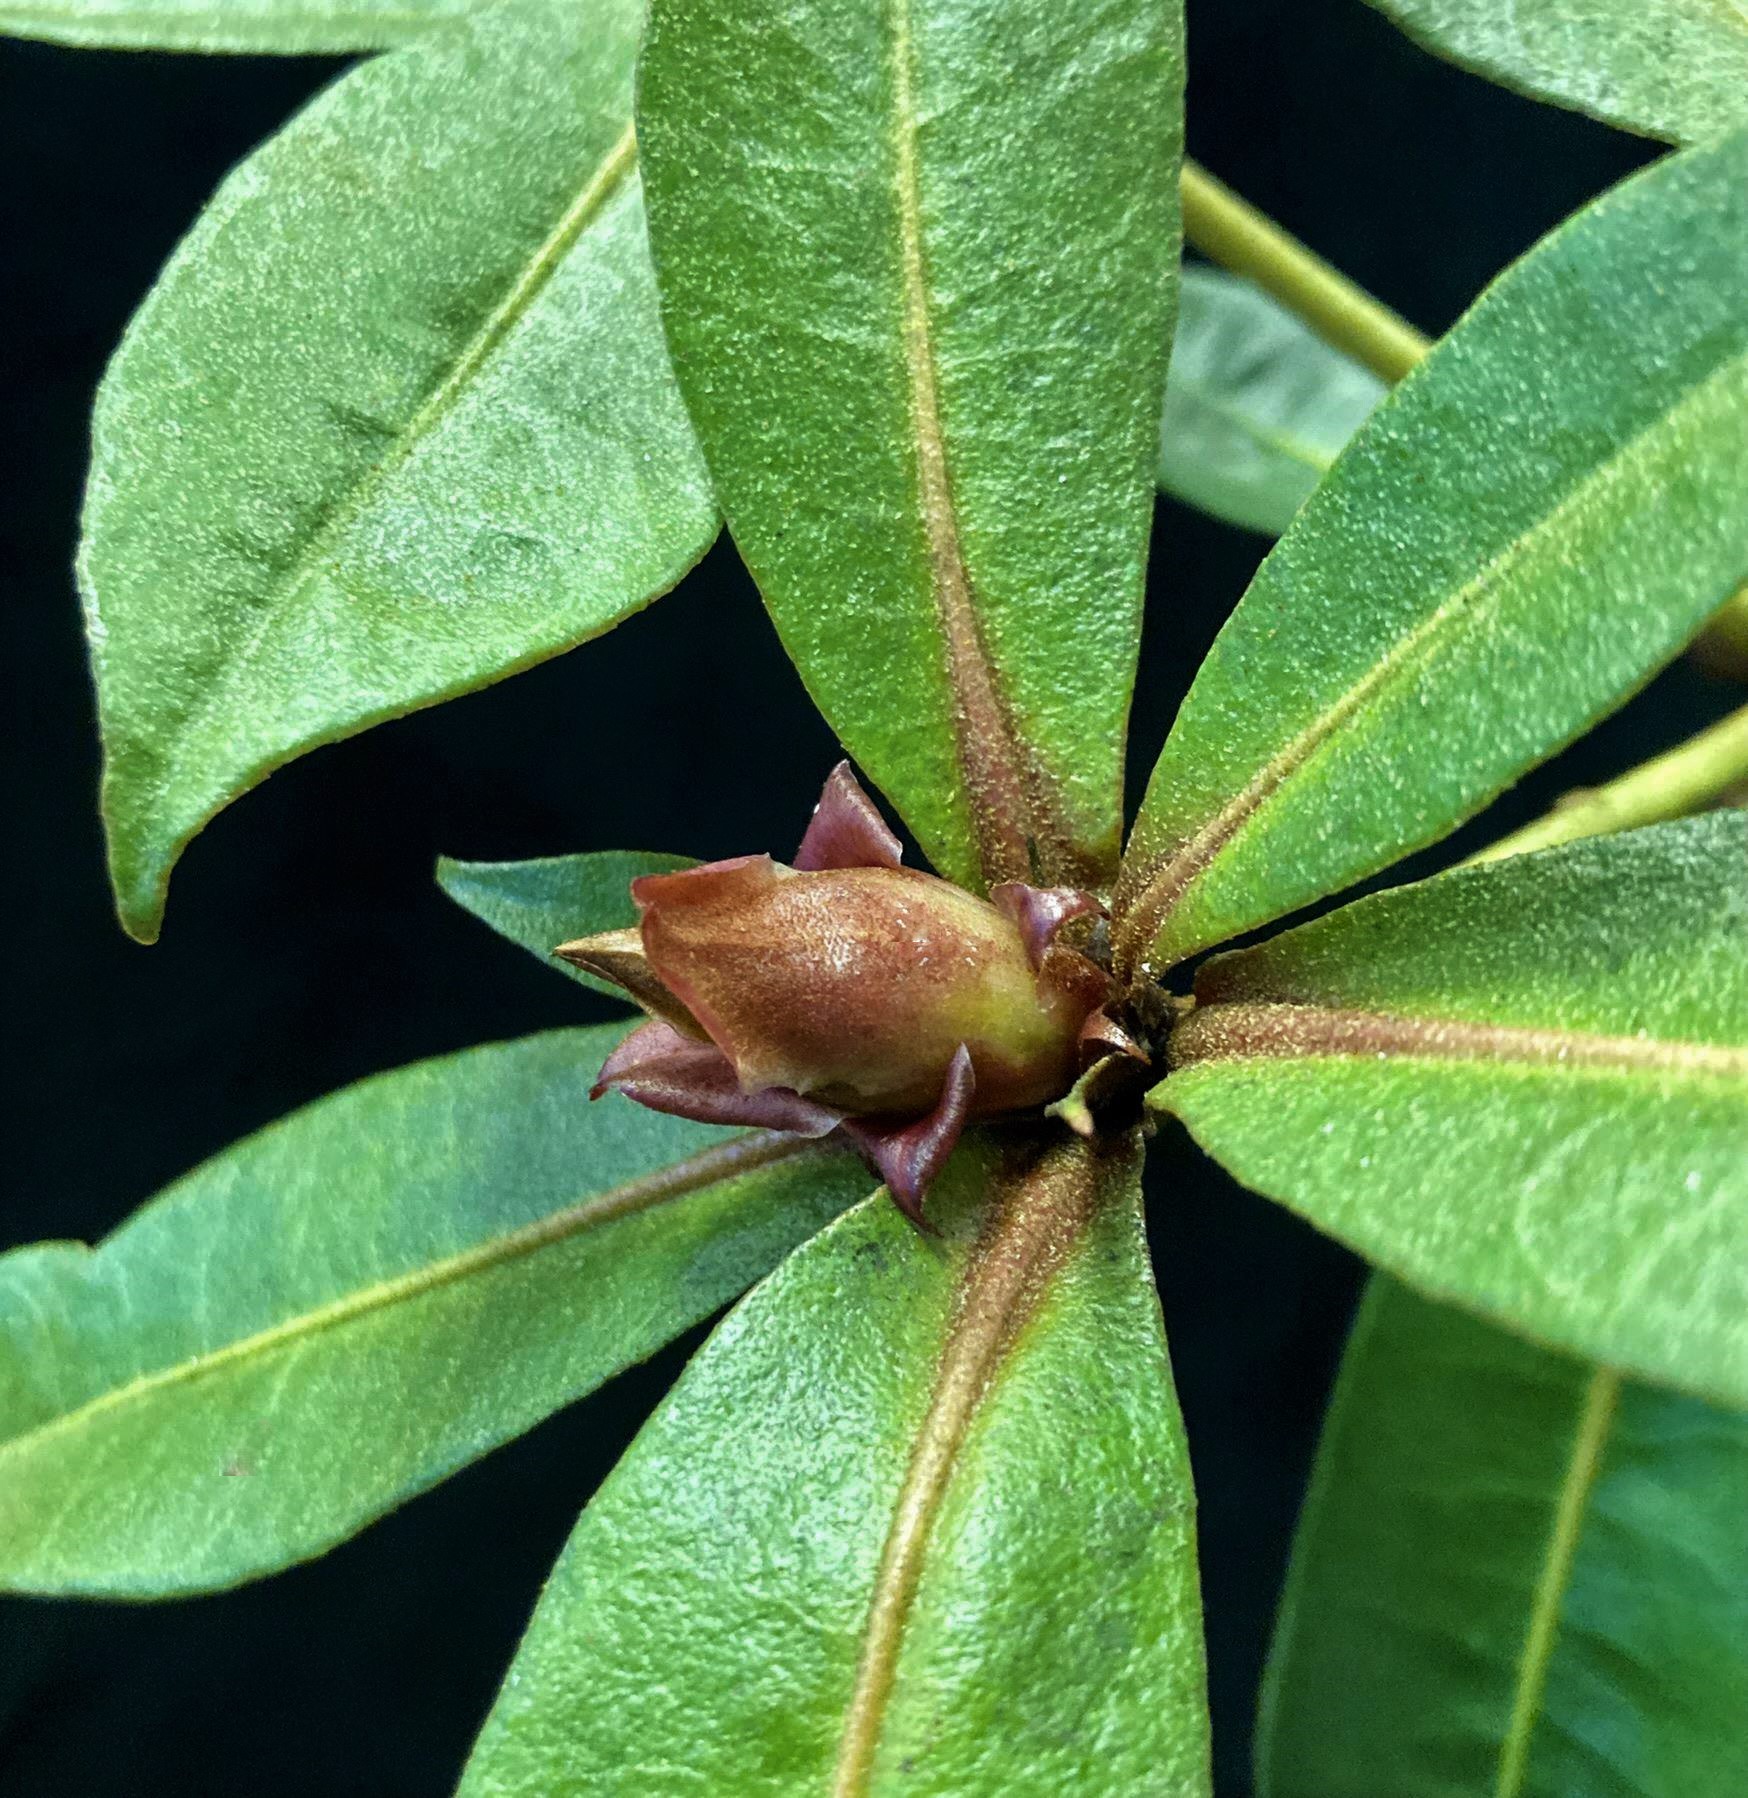 A close up detail of Rhododendron lanceolatum bud